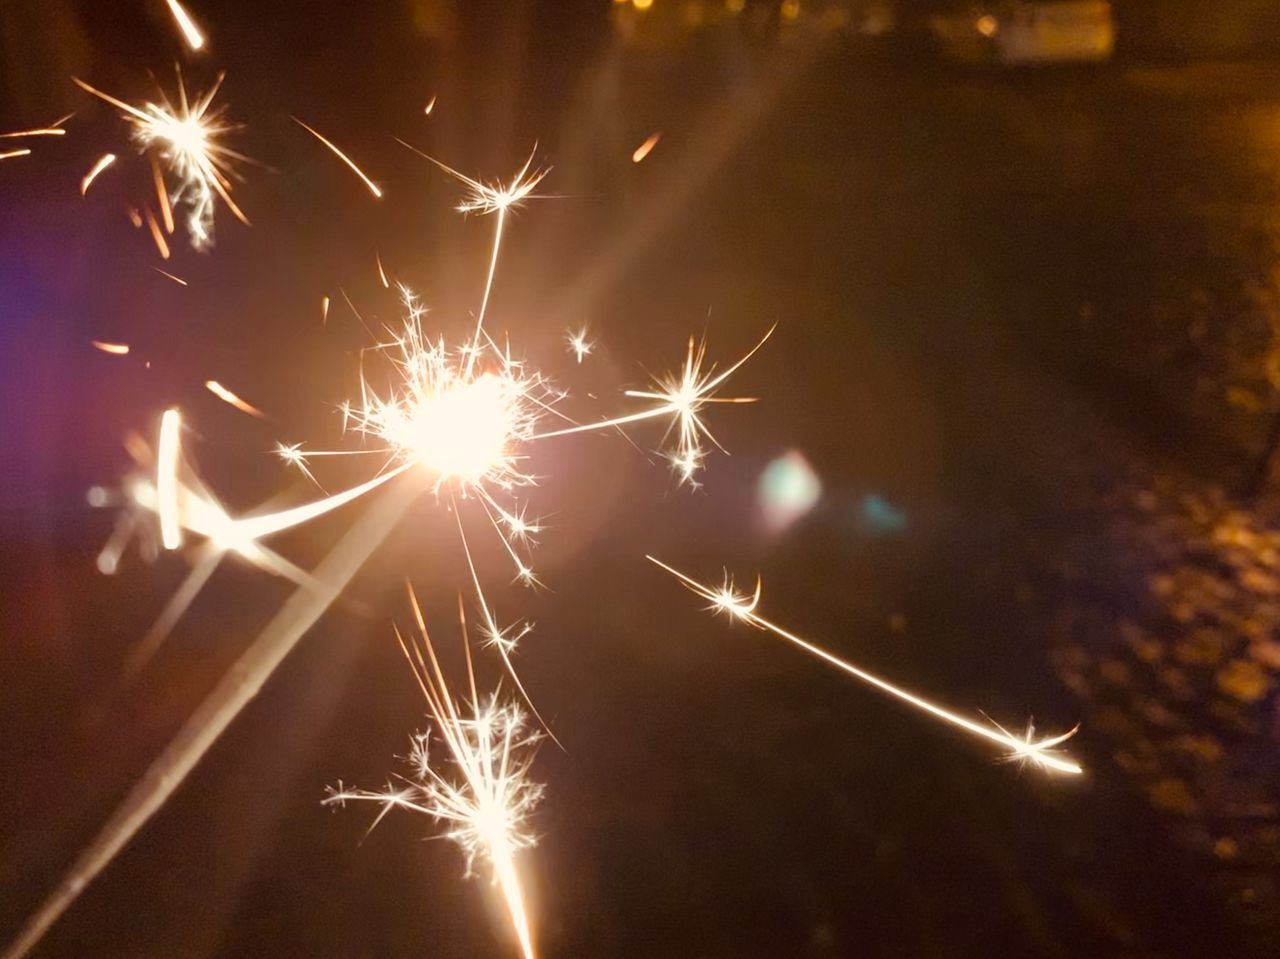 CLOSE-UP OF FIREWORKS IN NIGHT SKY